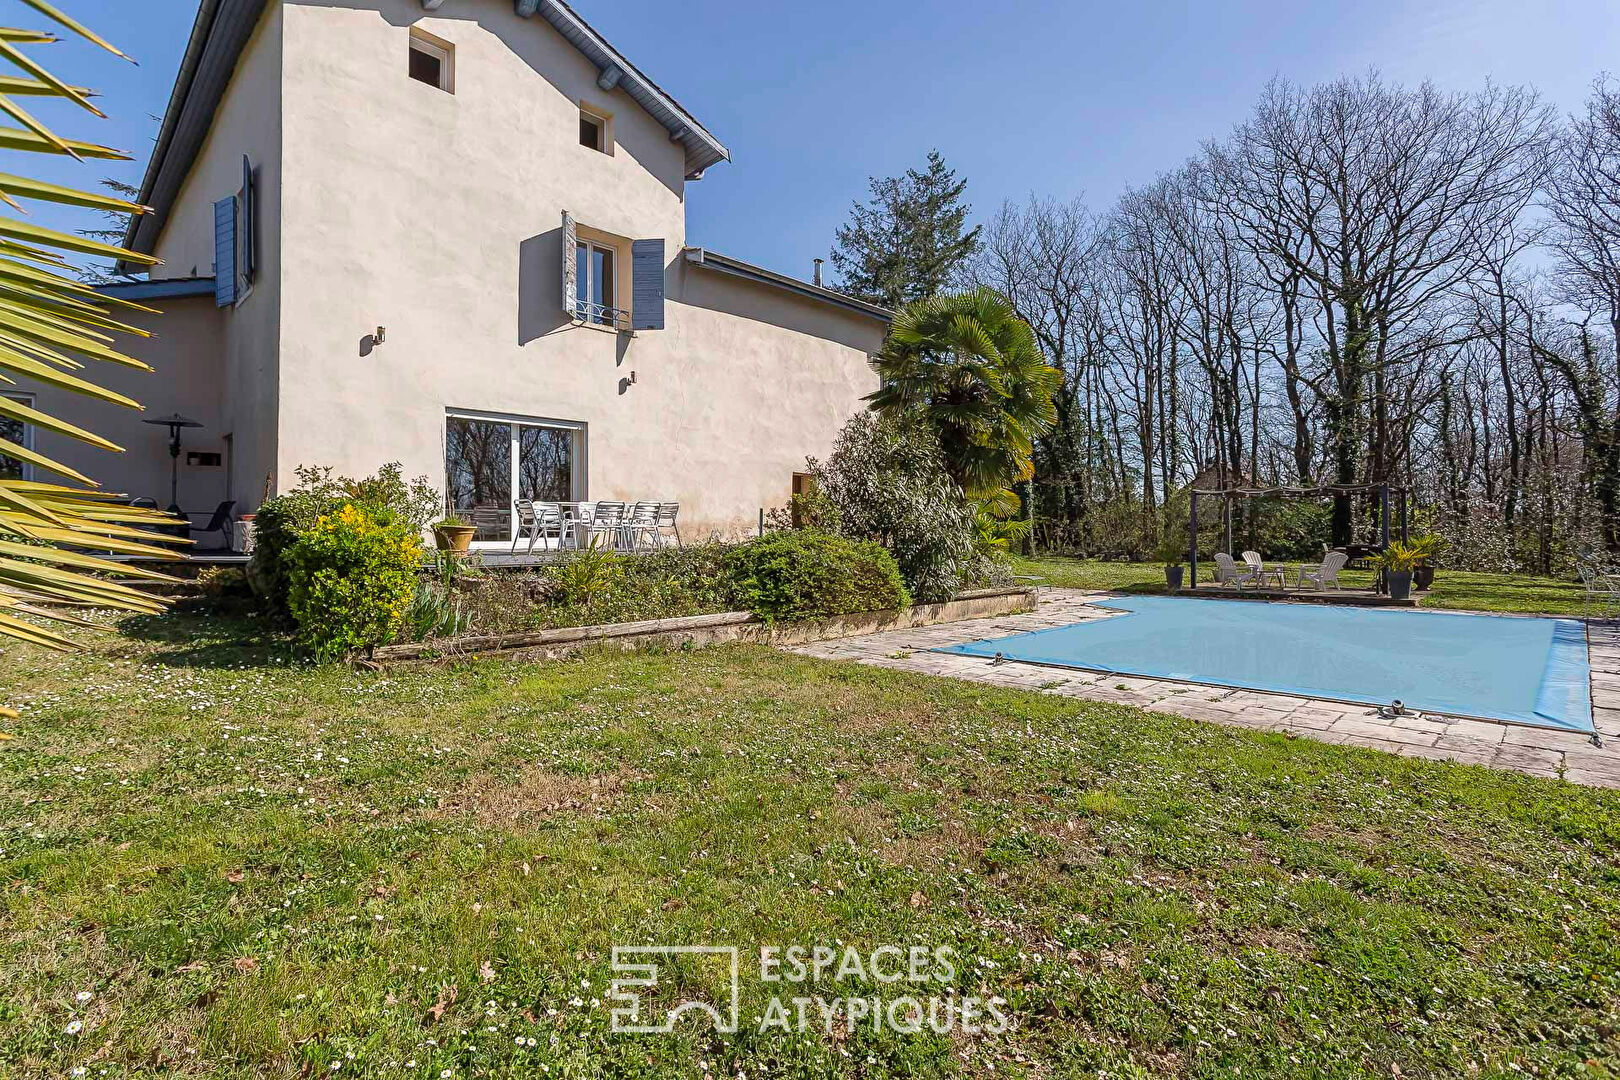 Farmhouse with swimming pool on a beautiful landscaped plot